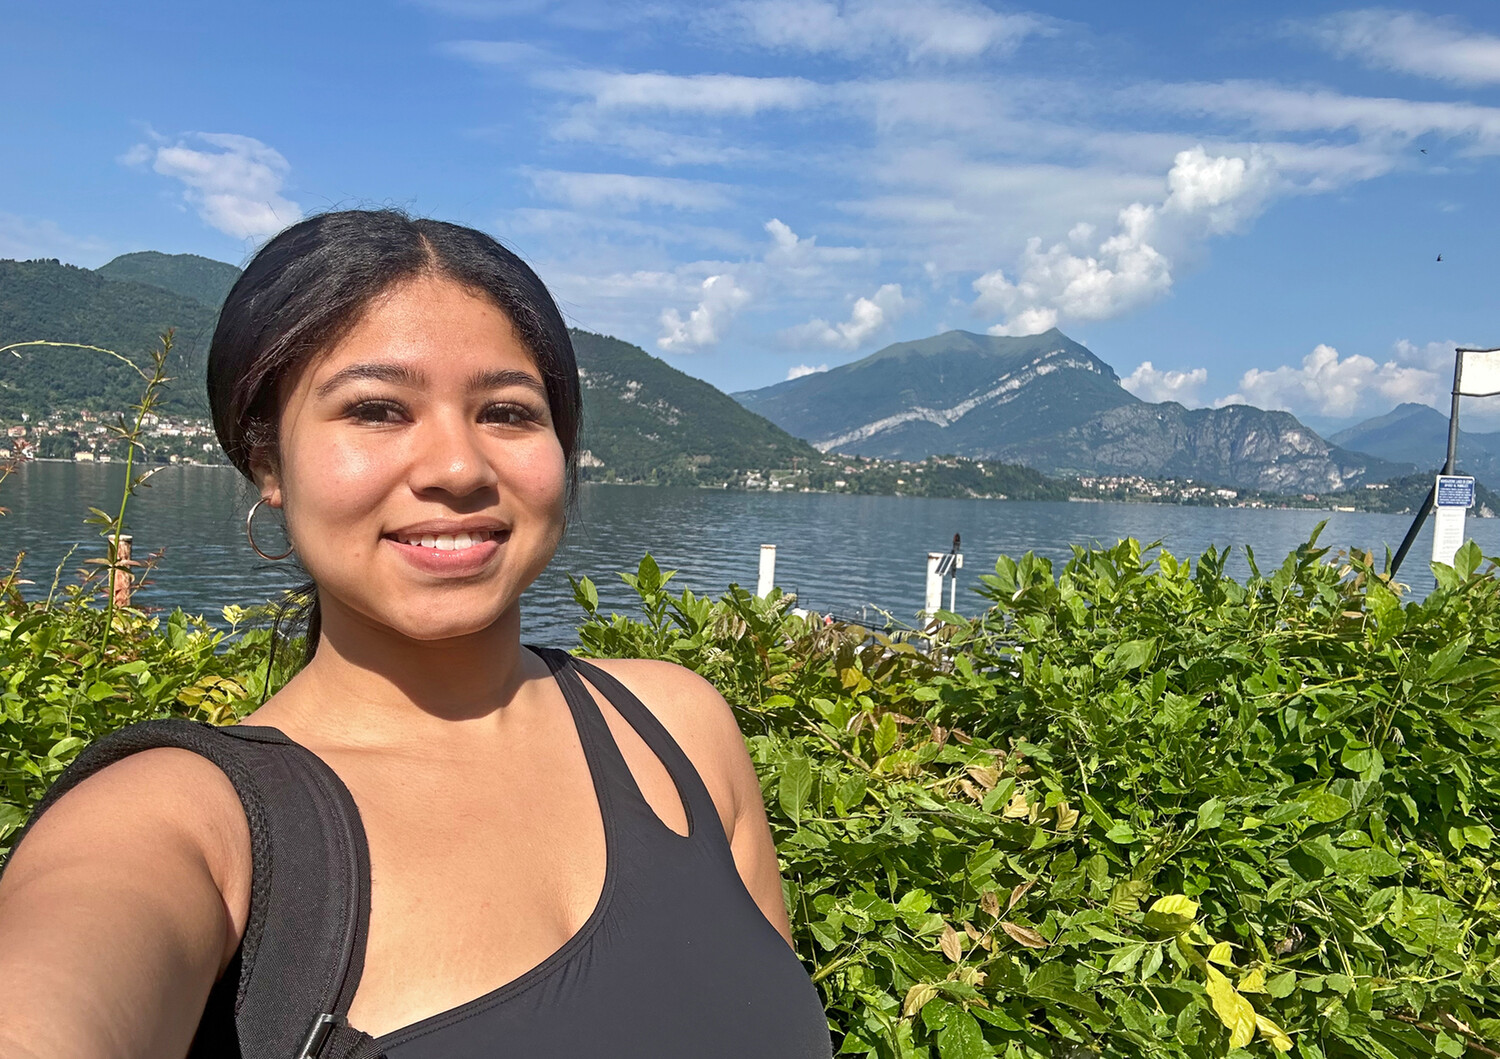 Student shadows doctors in Italy during summer fellowship